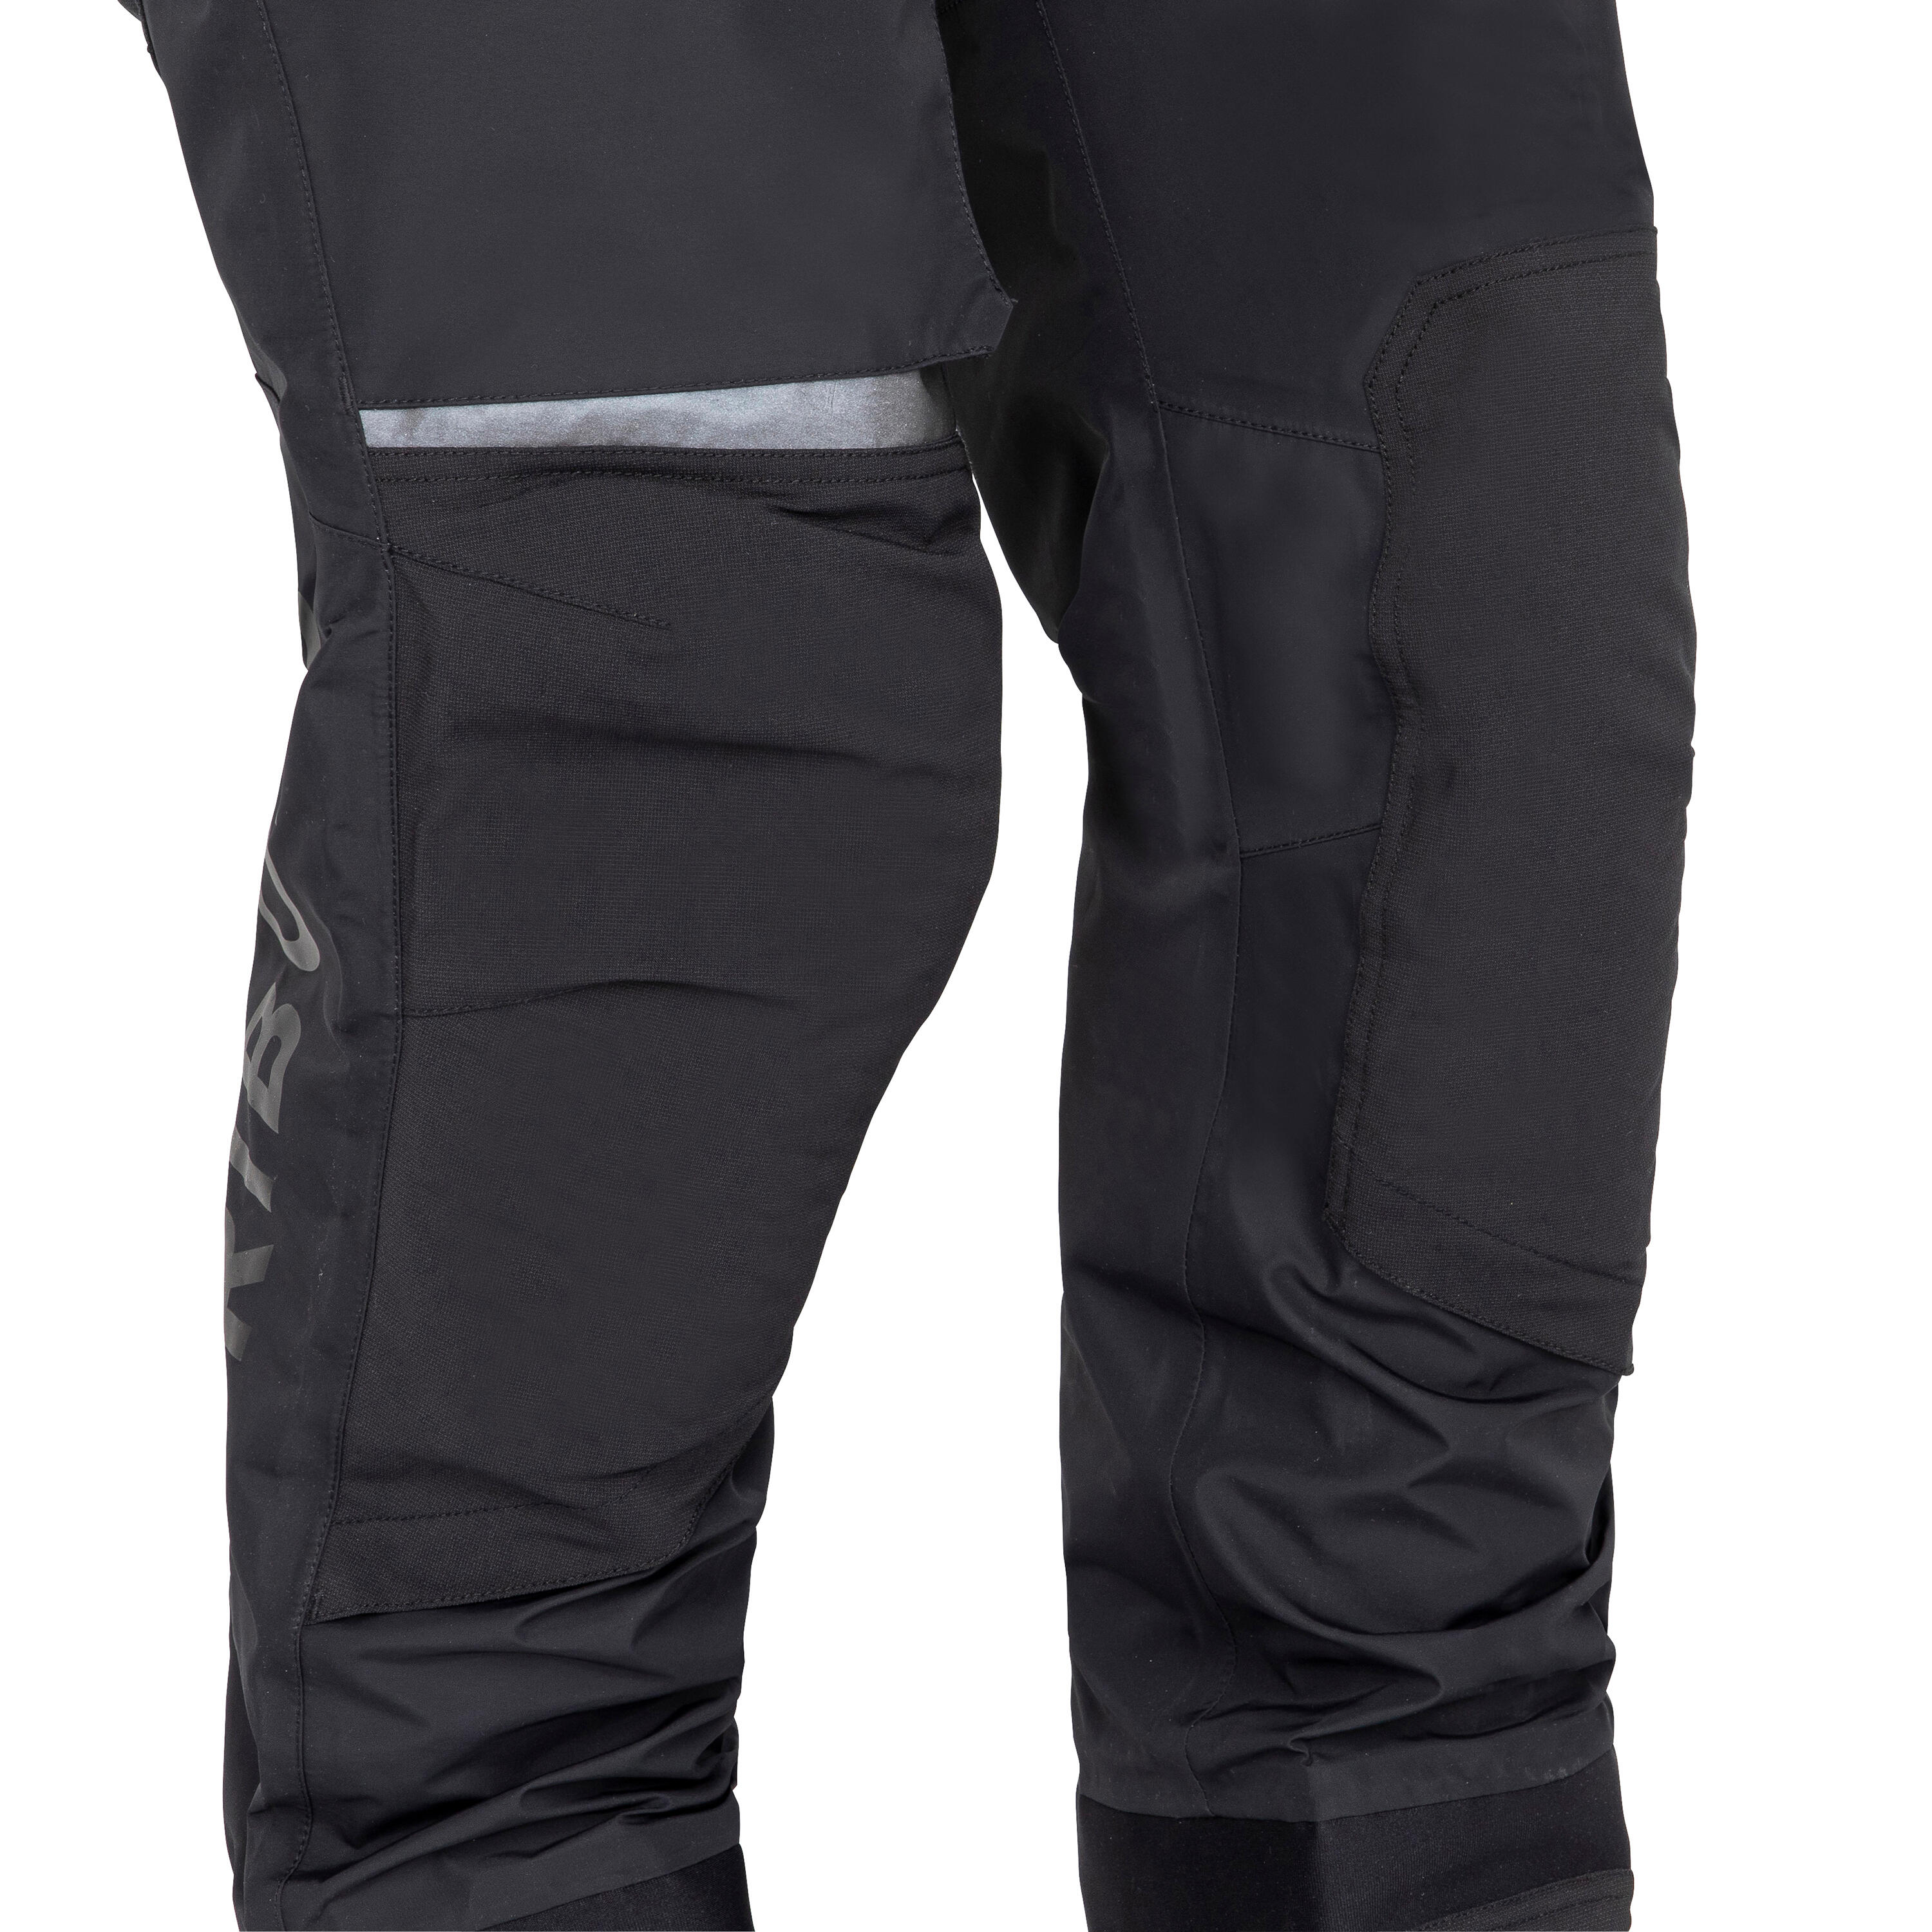 Adult Sailing overalls - Offshore Race 900 Black 6/11